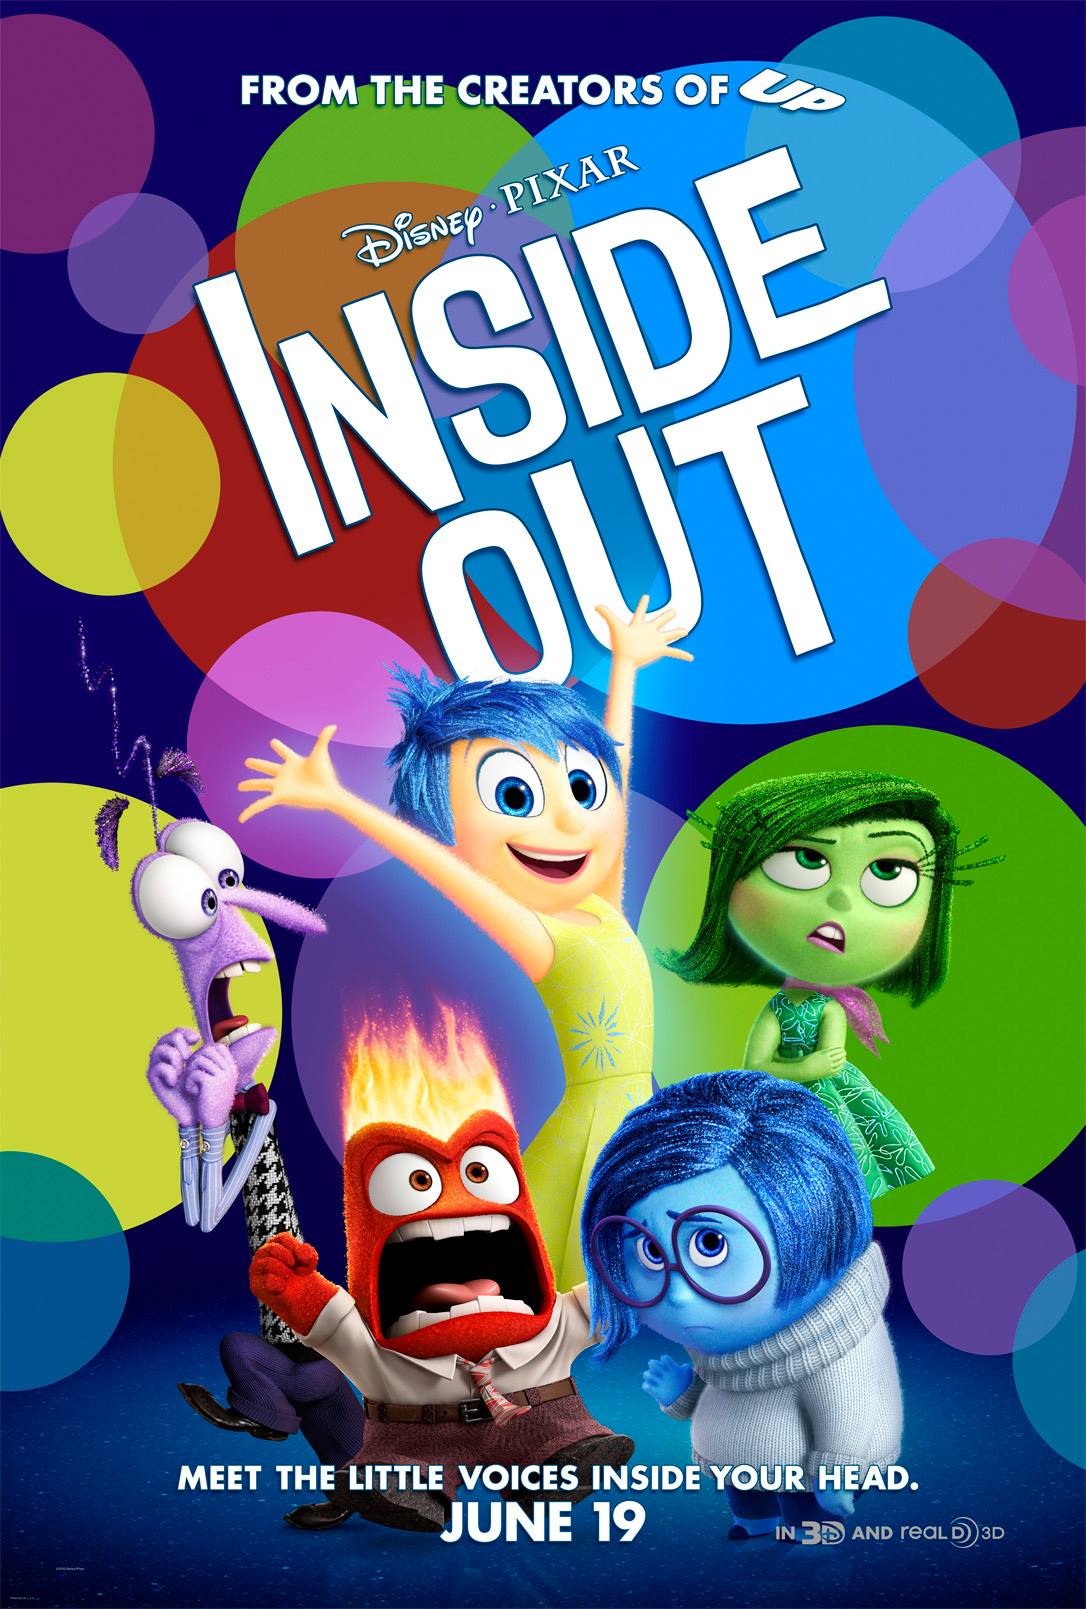 Inside Out (2015) Movie Poster Google image from http://www.fatmovieguy.com/disney-pixars-inside-out-trailer-2-and-movie-poster/